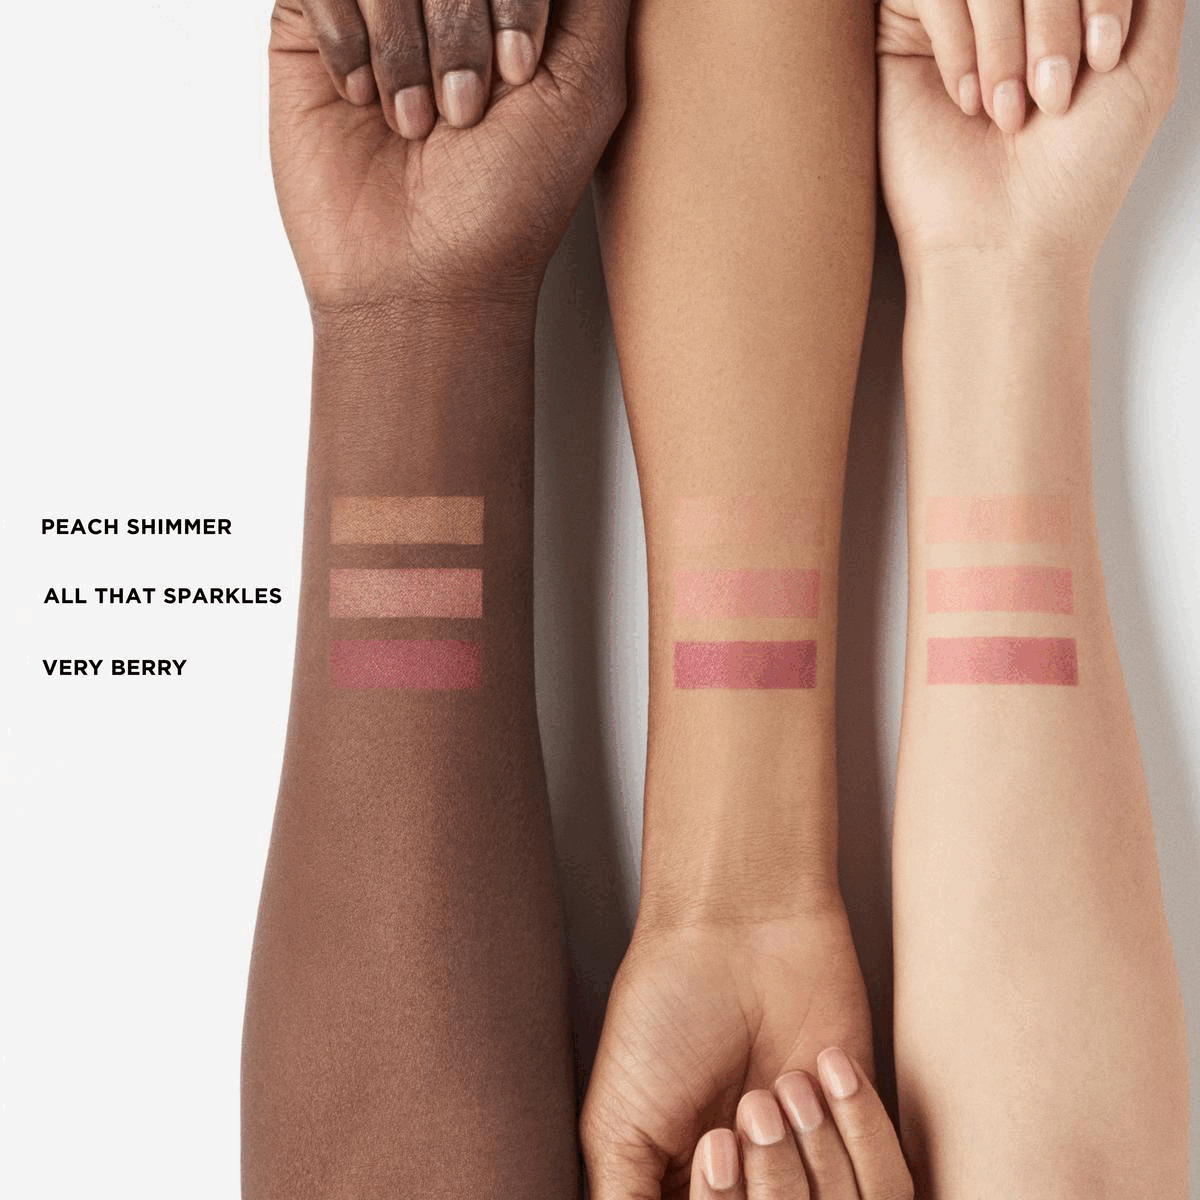 Image 1, swatch imagery. Image 2, difference between the blushes. Image 3, rose glow pearl blend